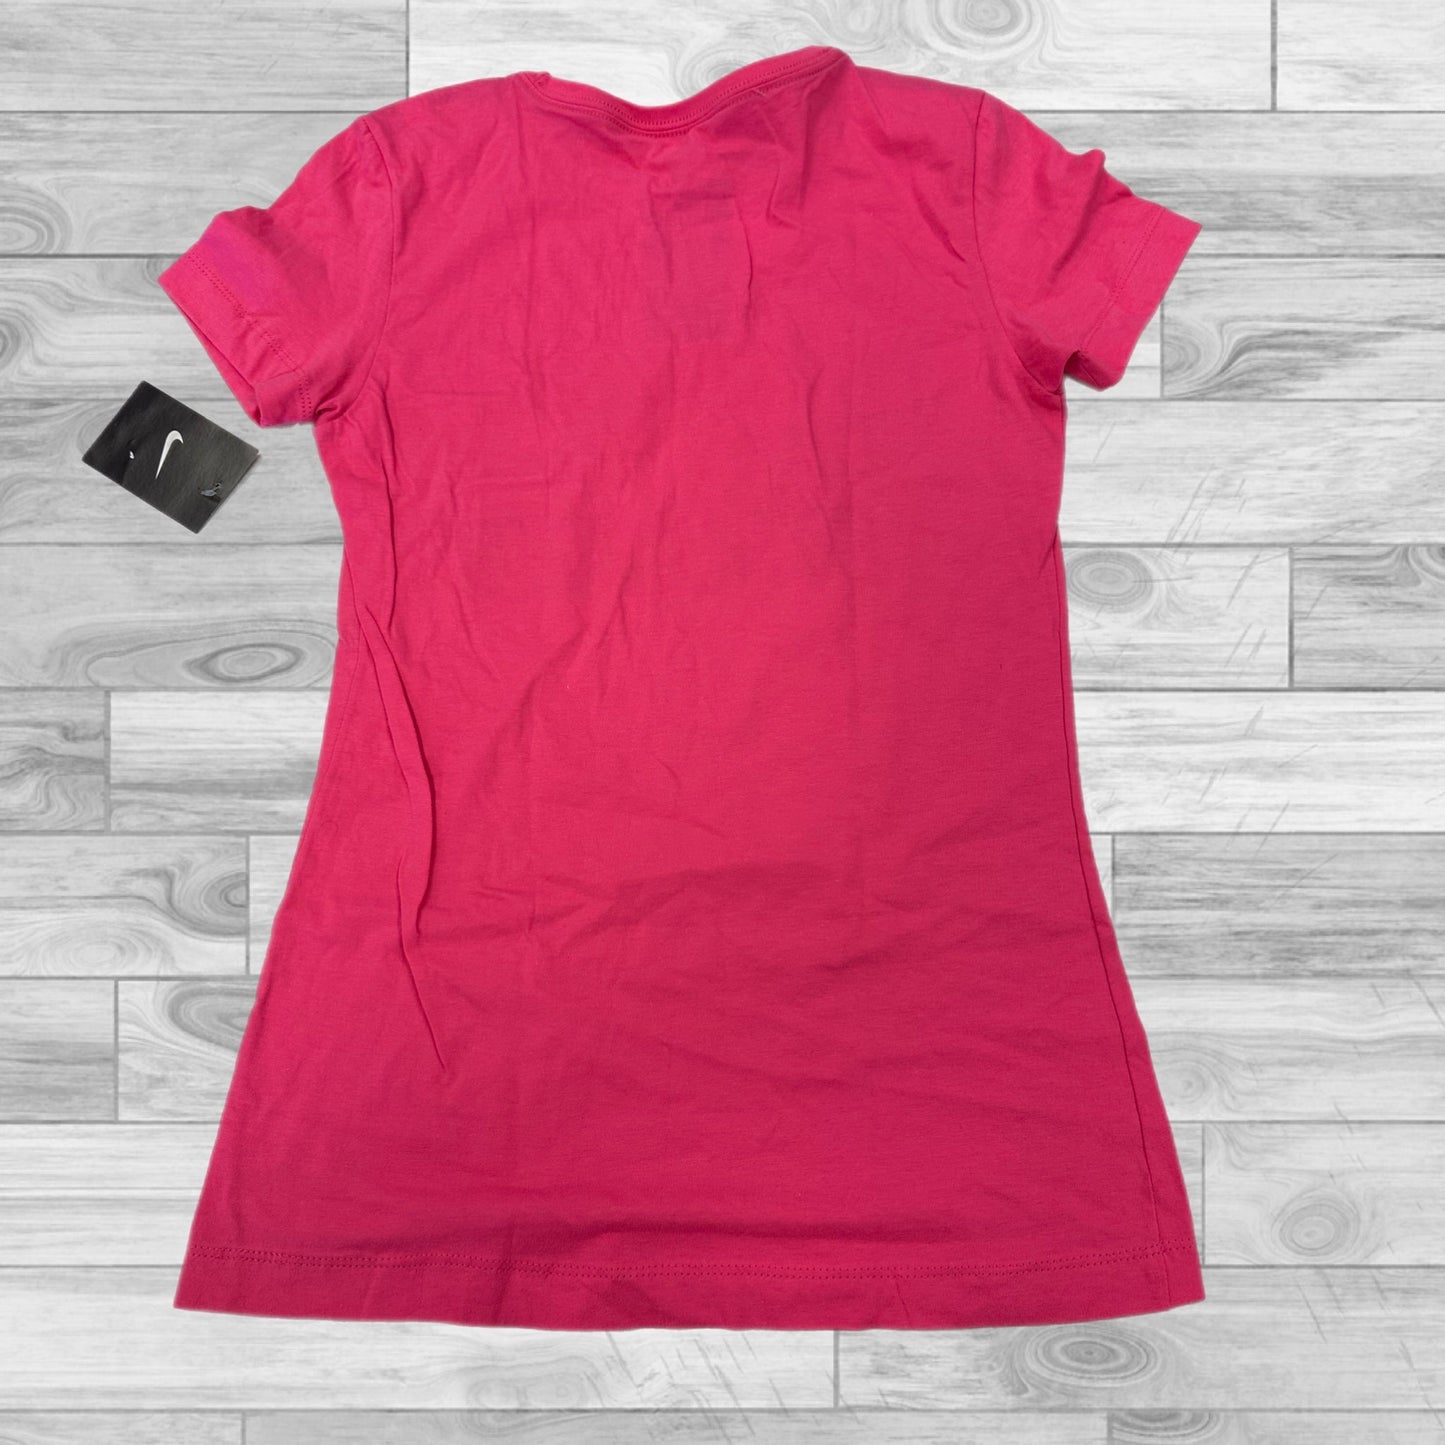 Pink Top Short Sleeve Basic Nike Apparel, Size S